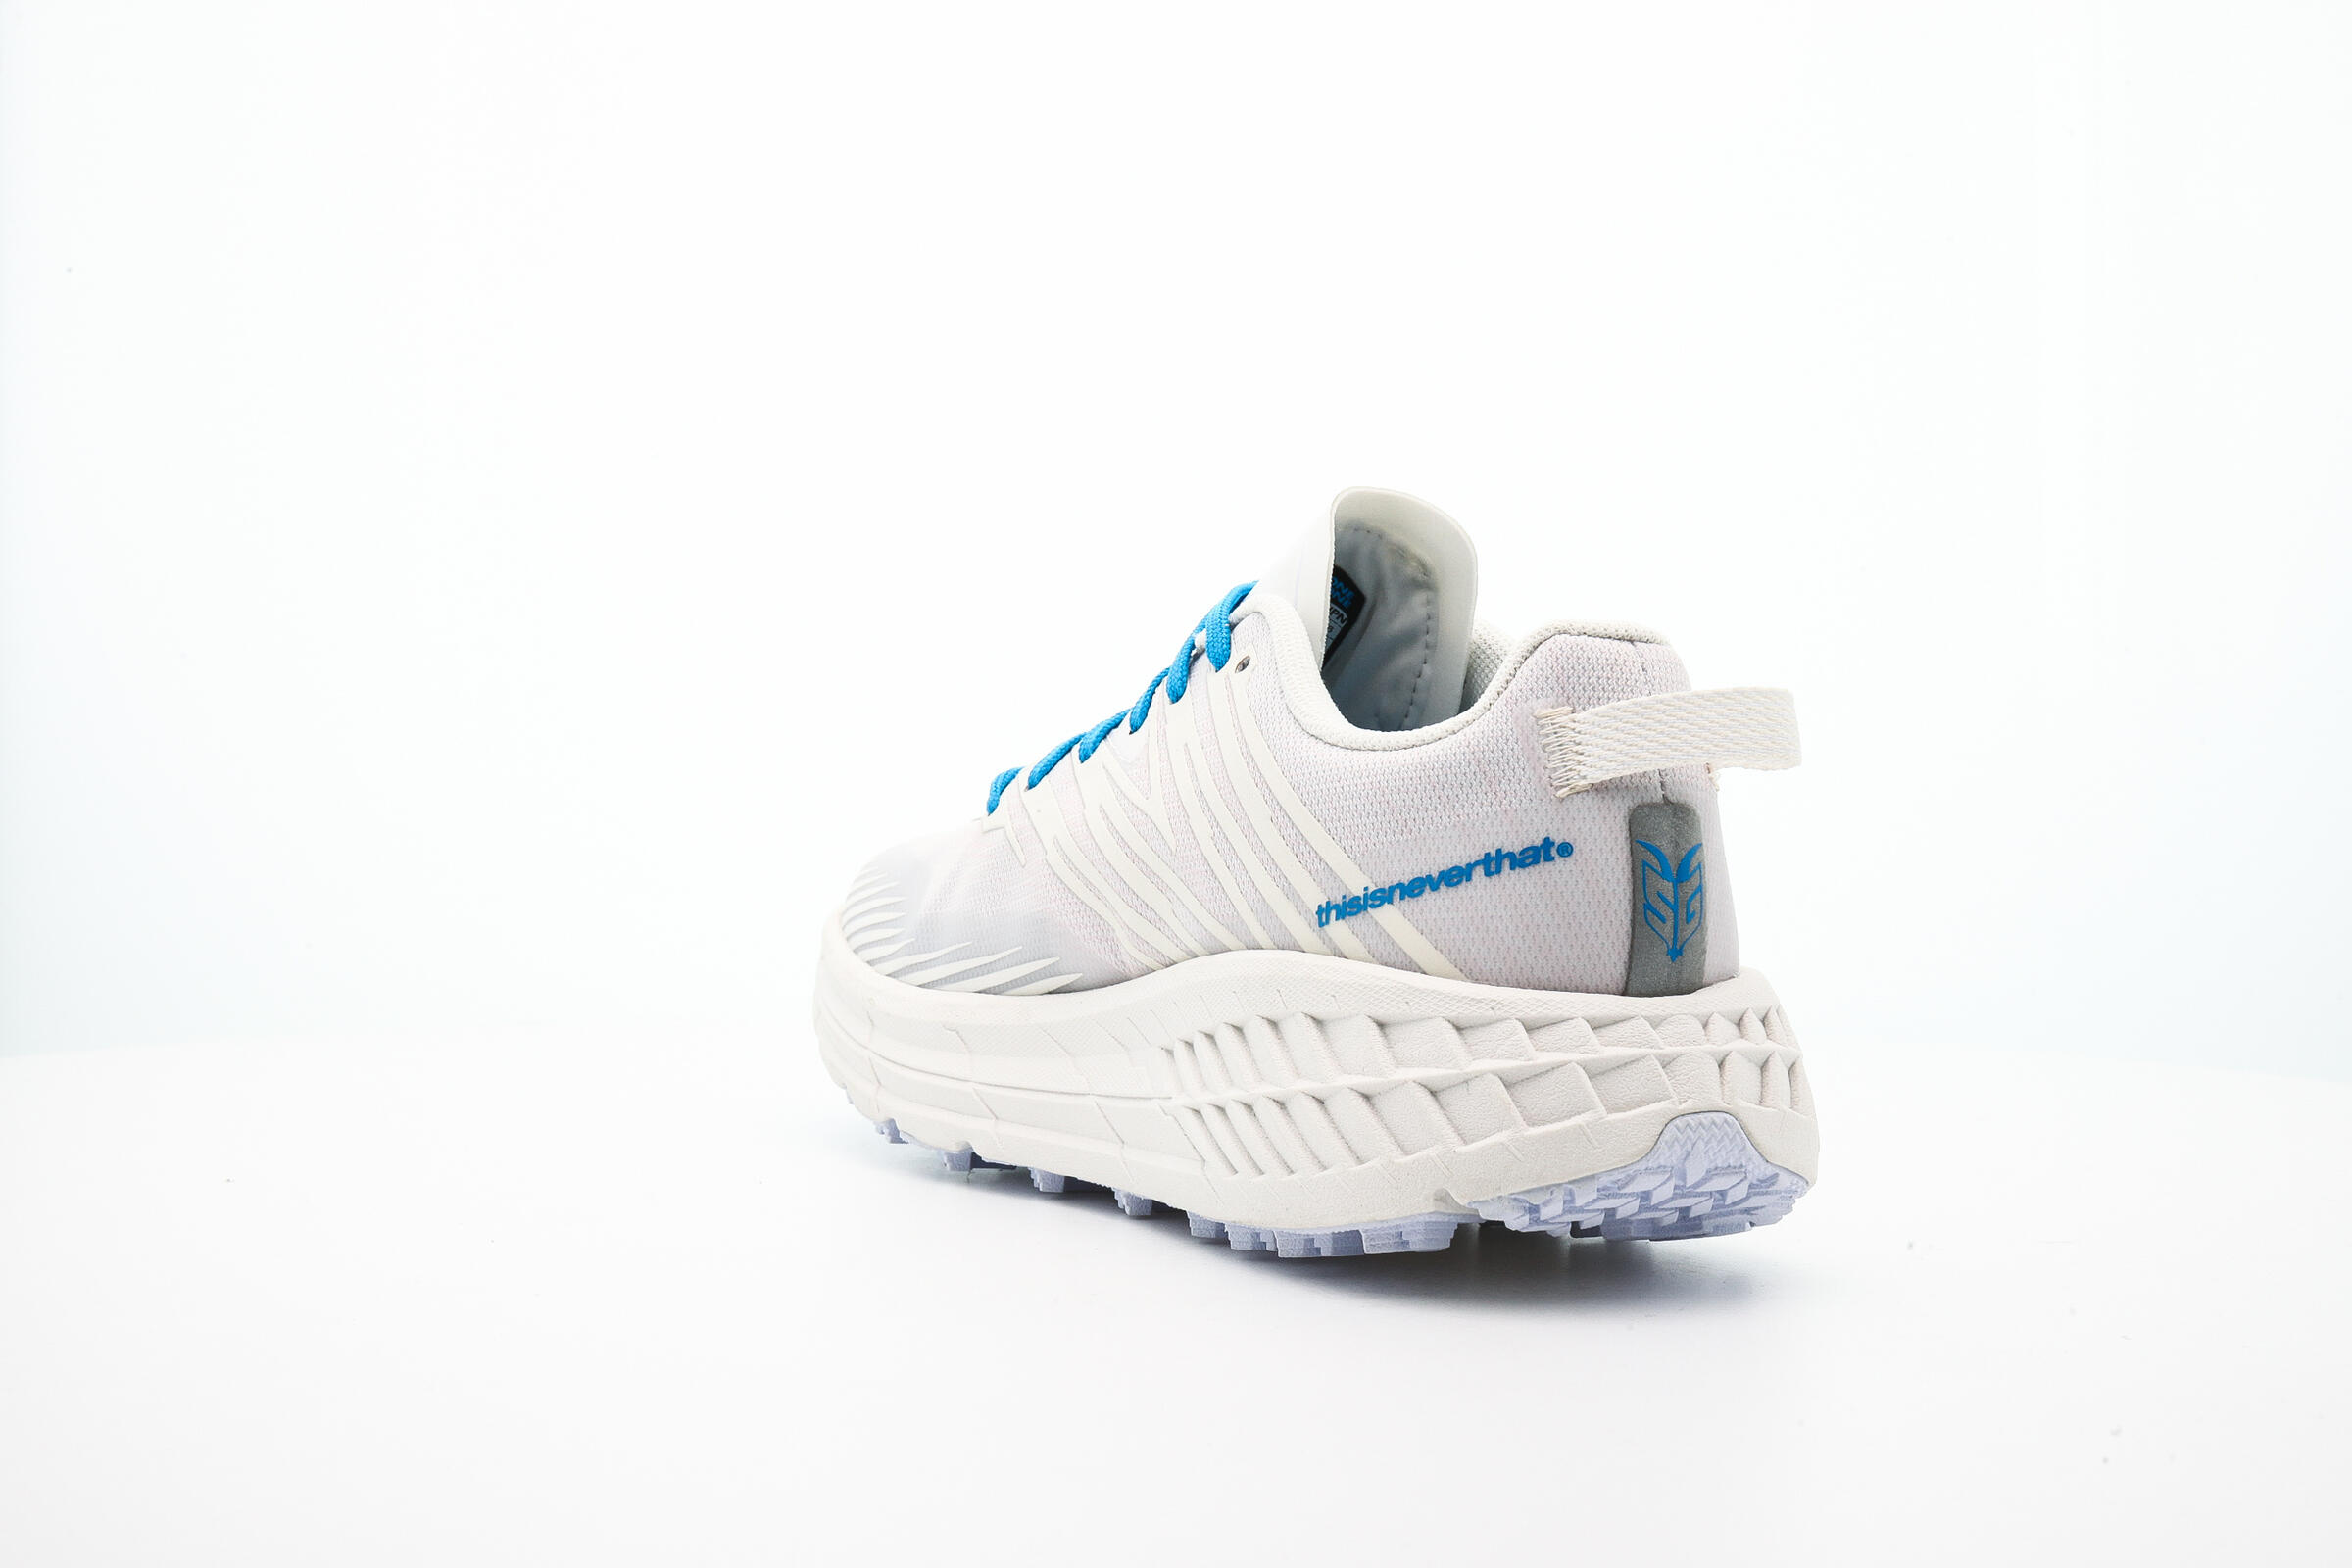 Hoka One One x THIS IS NEVER THAT SPEEDGOAT 4 "MARSHMALLOW"